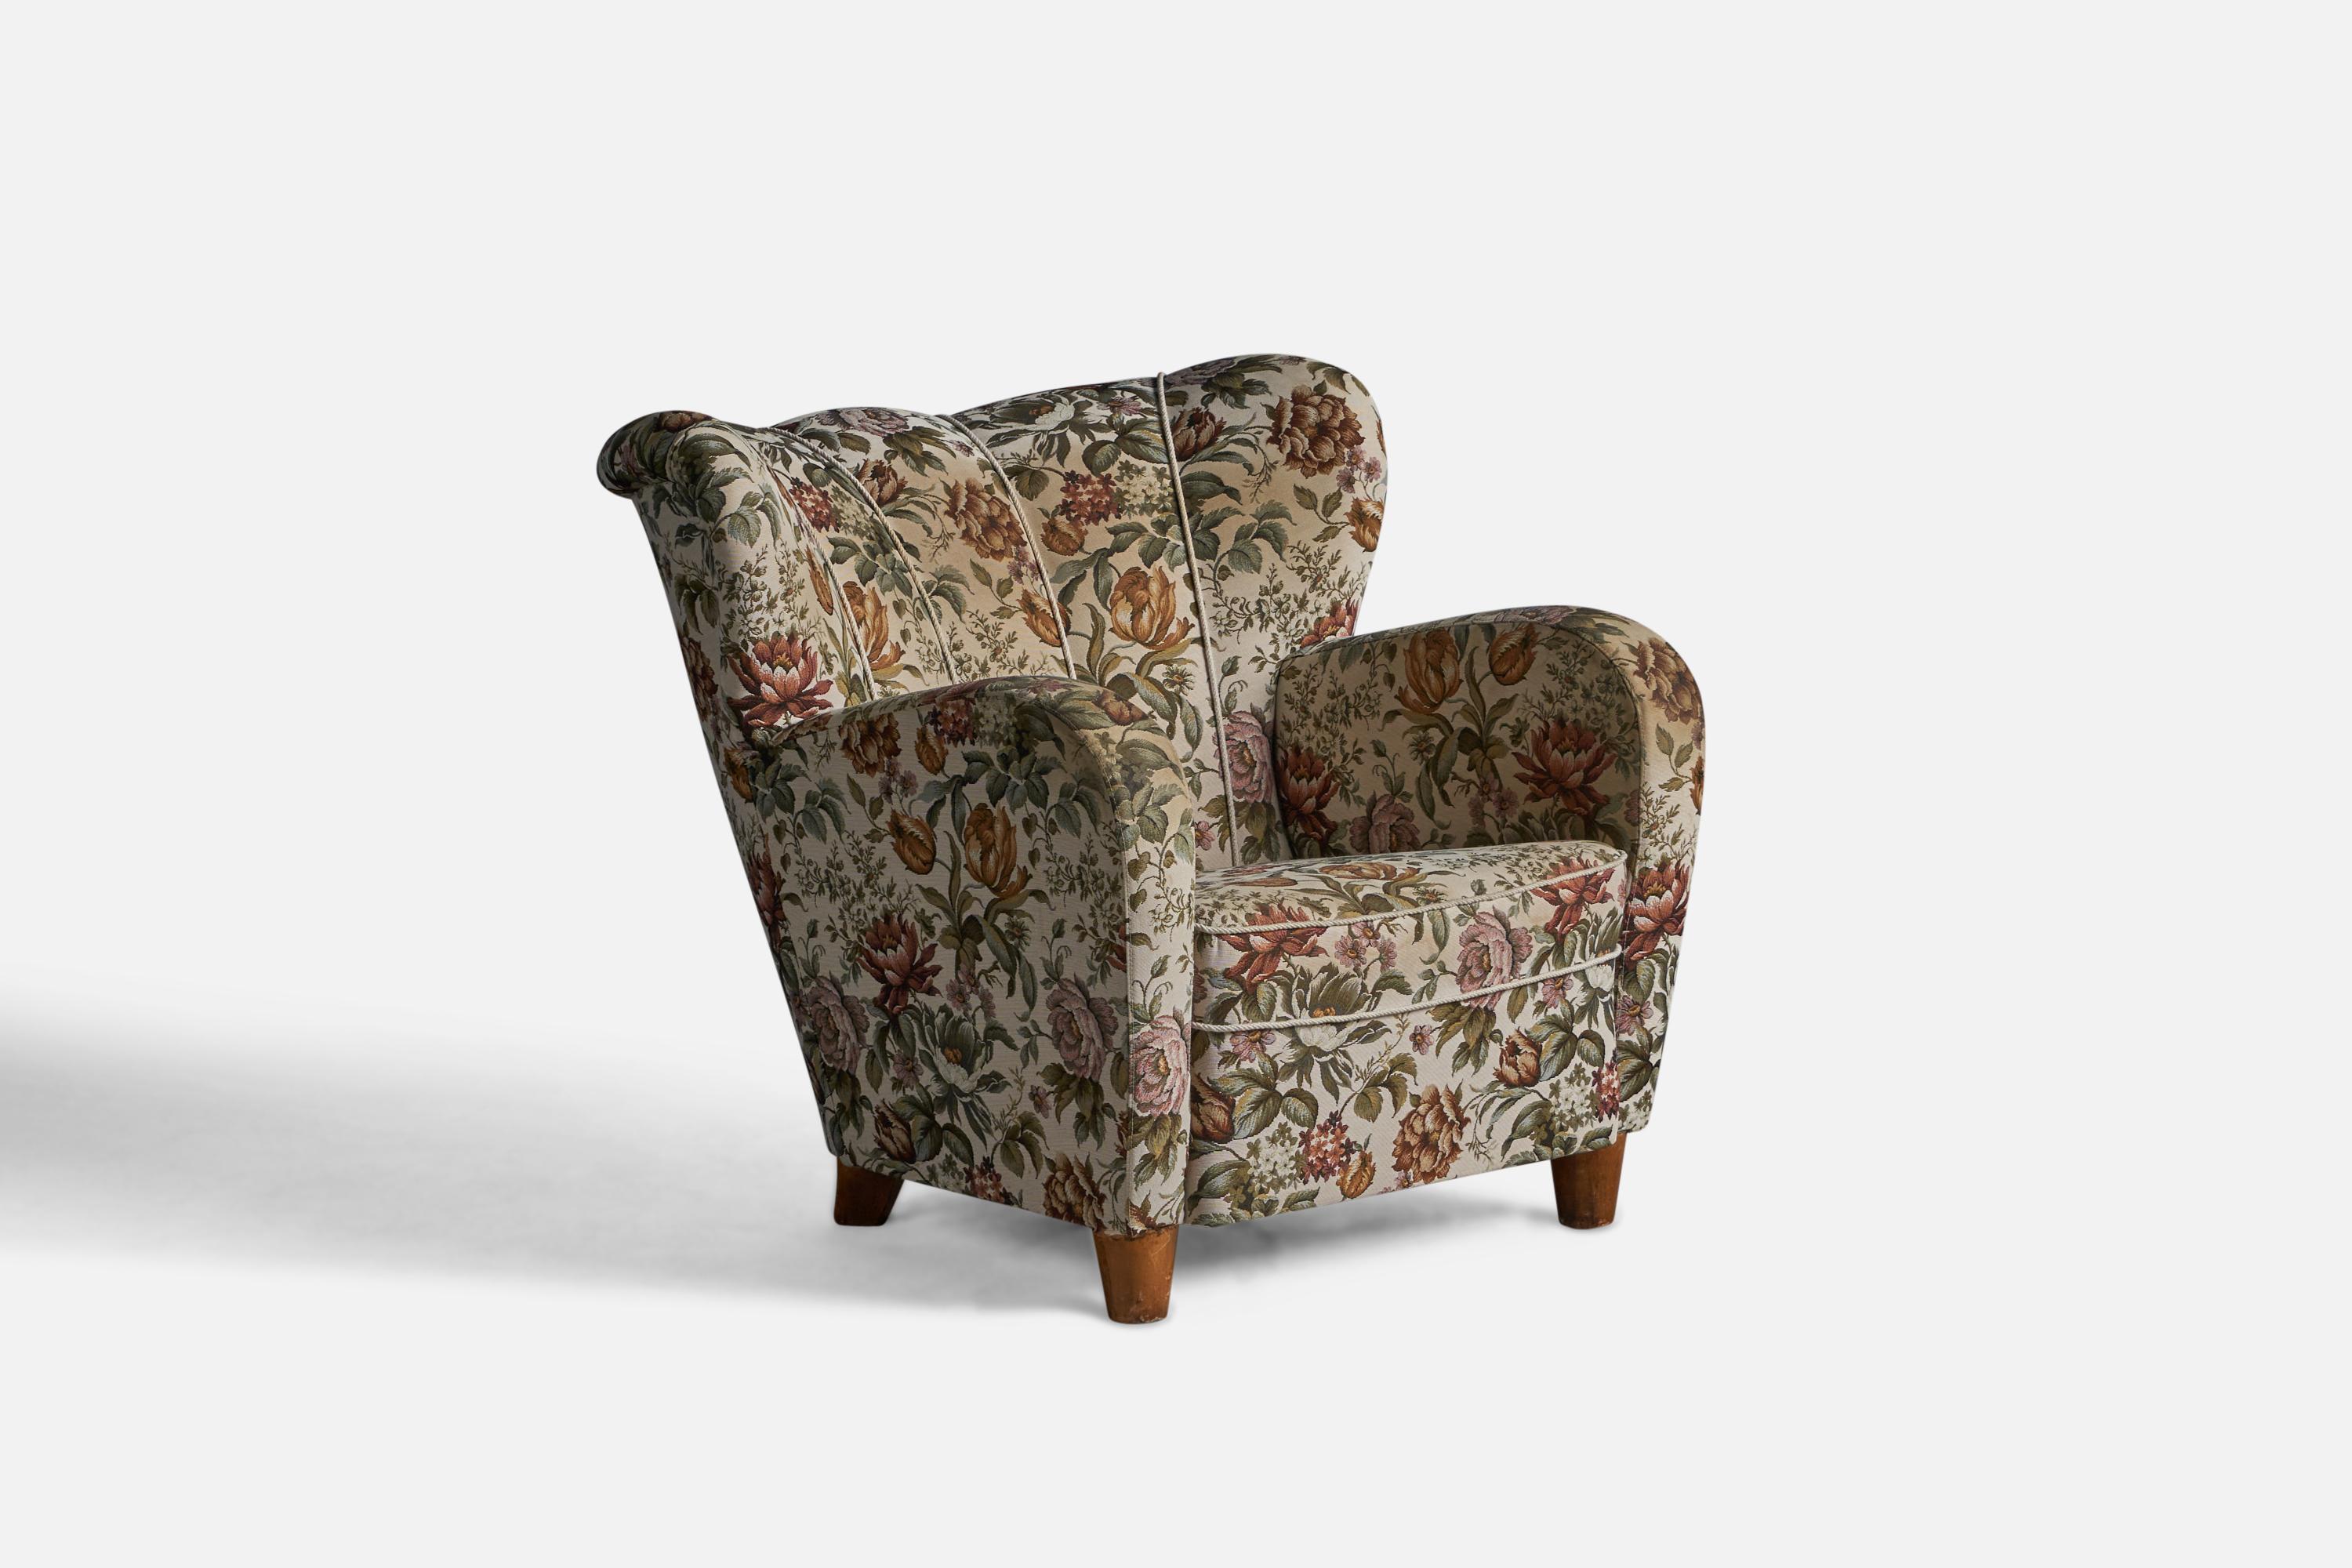 A floral printed fabric and stained wood lounge chair designed and produced in Finland, 1940s.
14.5